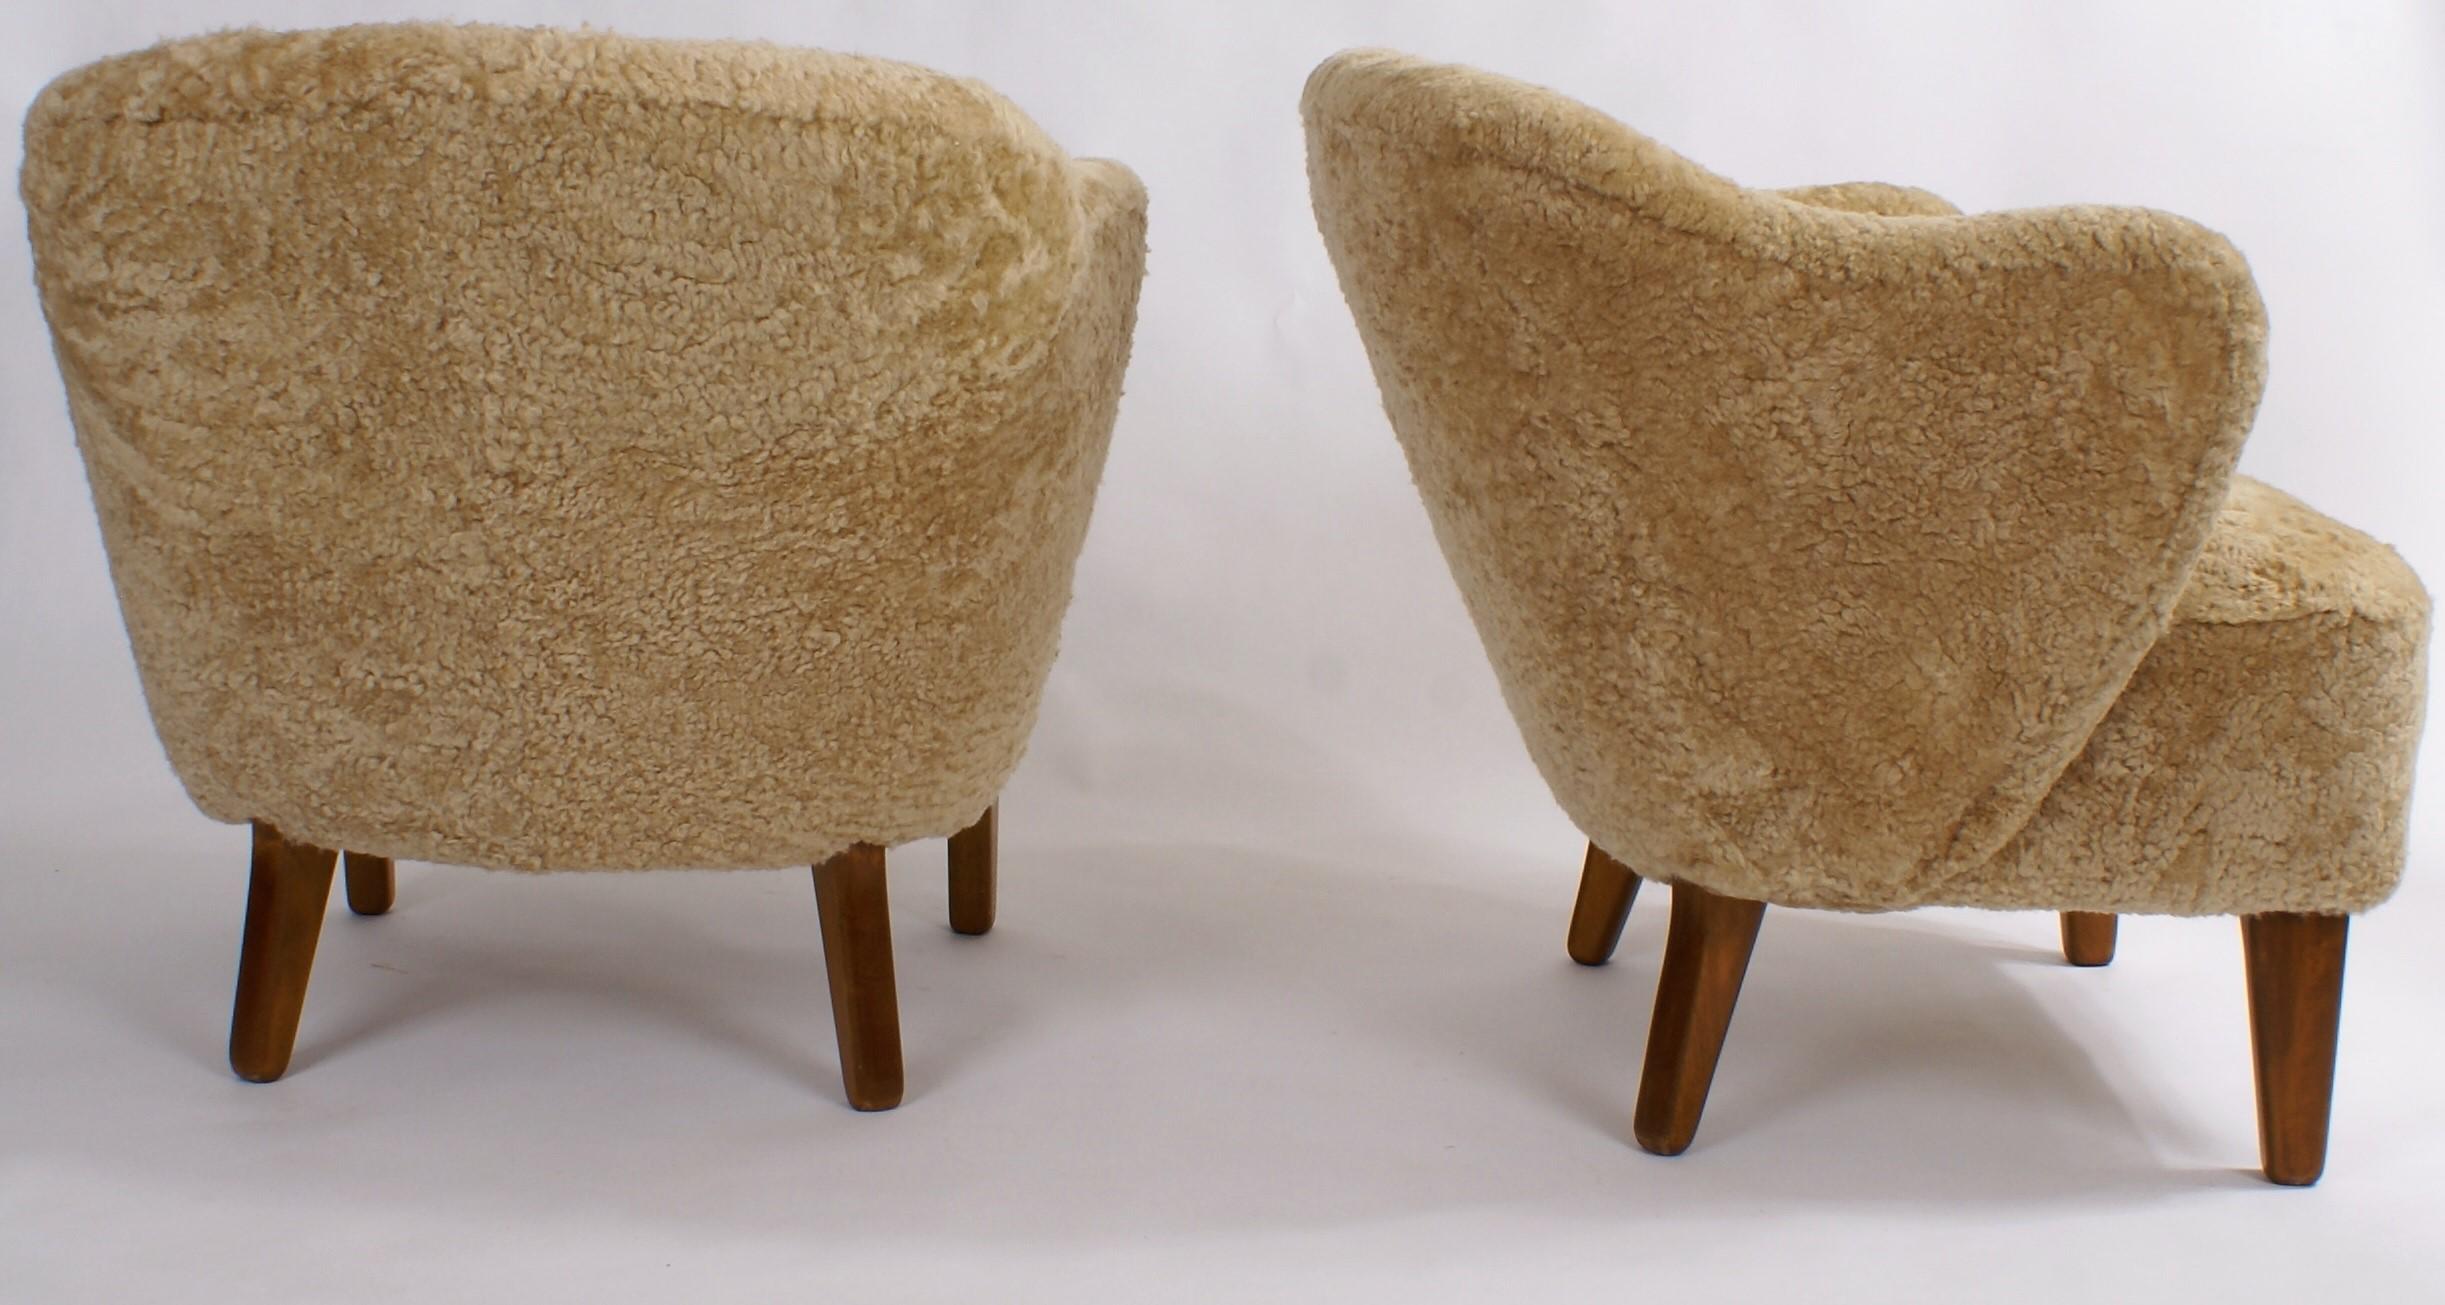 Mid-20th Century Flemming Lassen Pair of Easy Chairs in Honey Coloured Sheepksin, 1940s